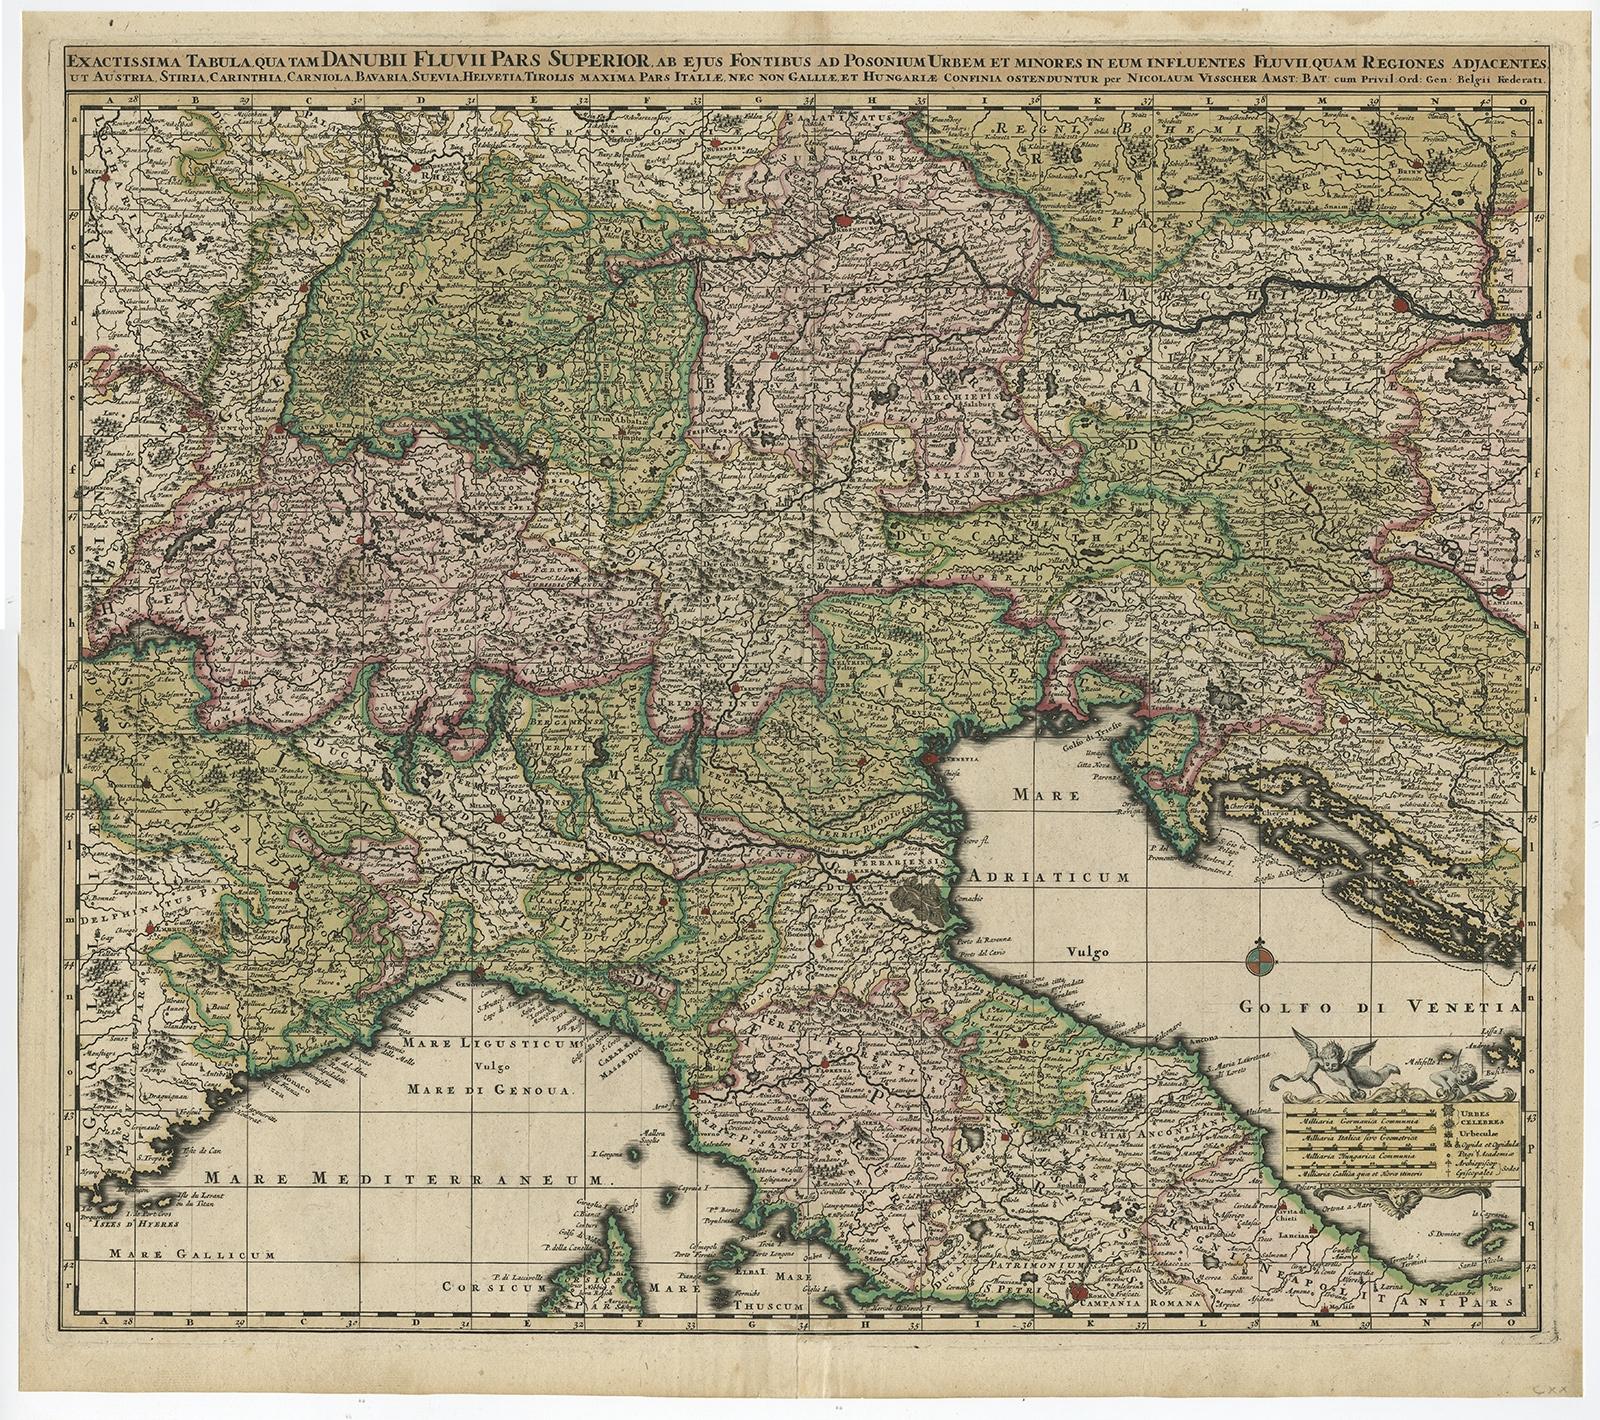 Antique map titled 'Exactissima Tabula, qua tam Danubii Fluvii Pars Superior'. 

Very finely detailed map covering the region of northern Italy, Austria, Slovenia and Croatia. The course of the Danube is prominently shown from its headwaters in